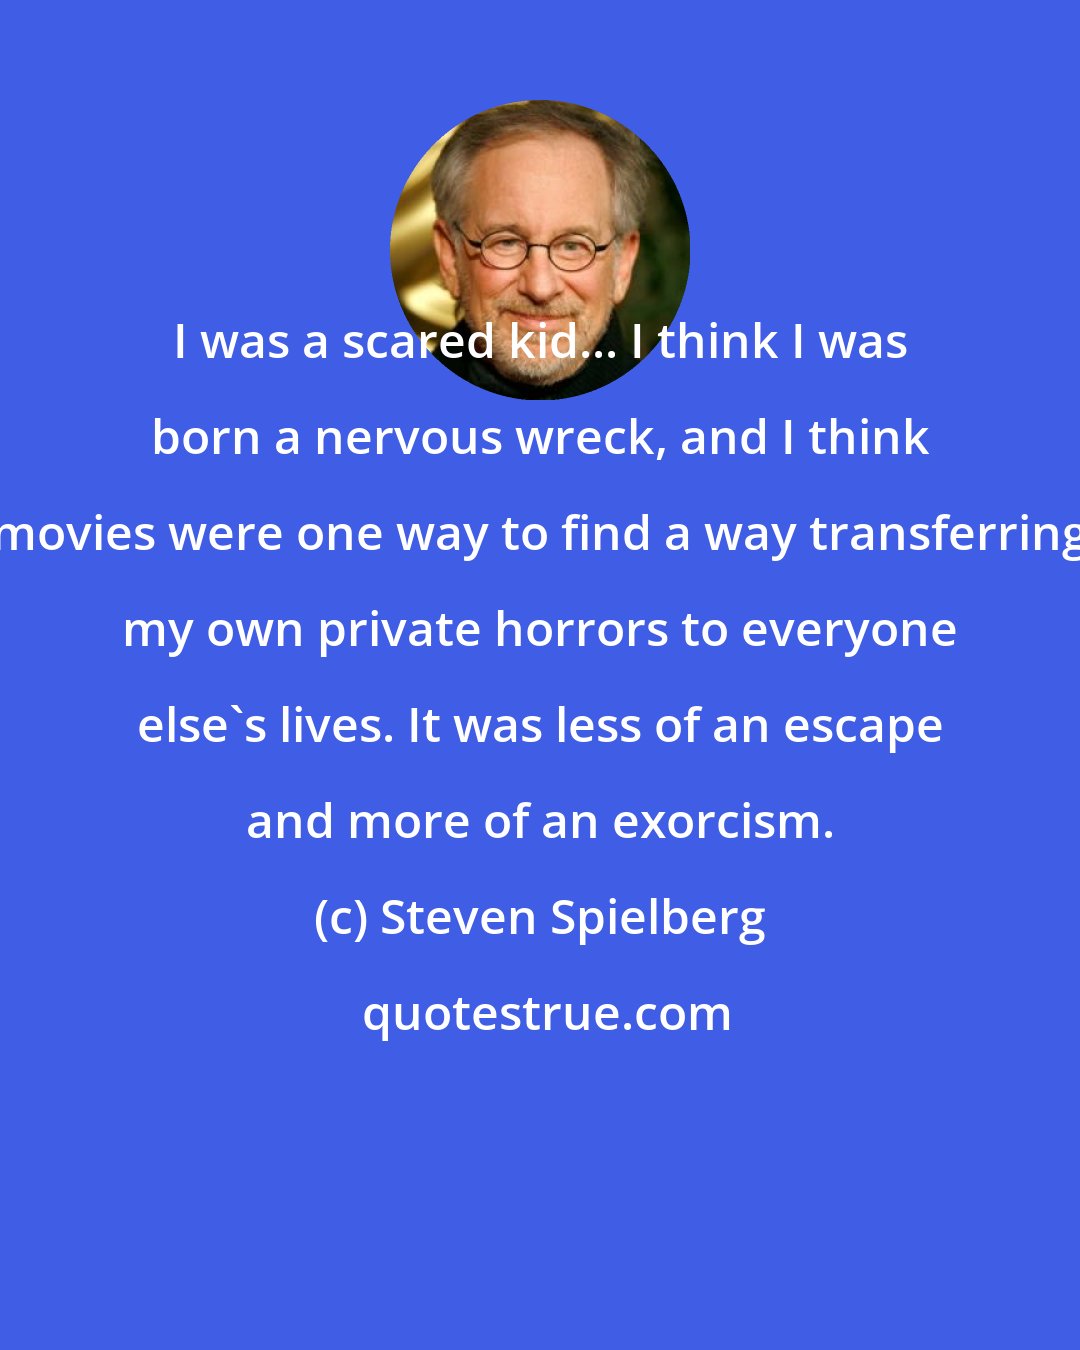 Steven Spielberg: I was a scared kid... I think I was born a nervous wreck, and I think movies were one way to find a way transferring my own private horrors to everyone else's lives. It was less of an escape and more of an exorcism.